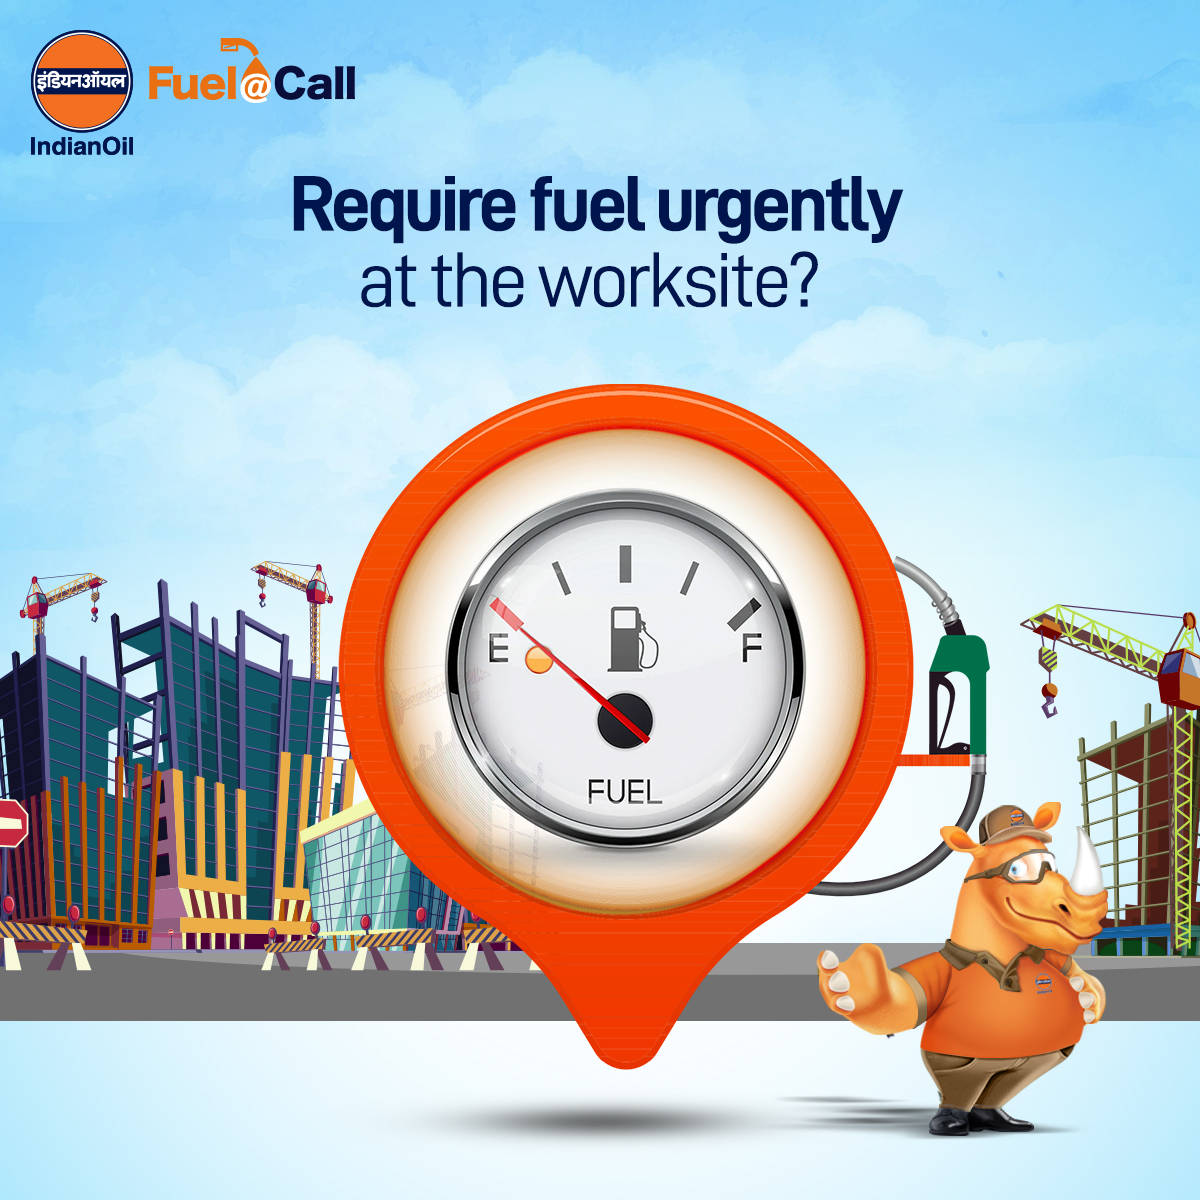 Avail fuel for stationary equipment or DG sets with our Fuel@Call app. Our platform currently provides end-to-end fuel (diesel) delivery solutions to industrial/commercial customers. Download the app Fuel@Call now.